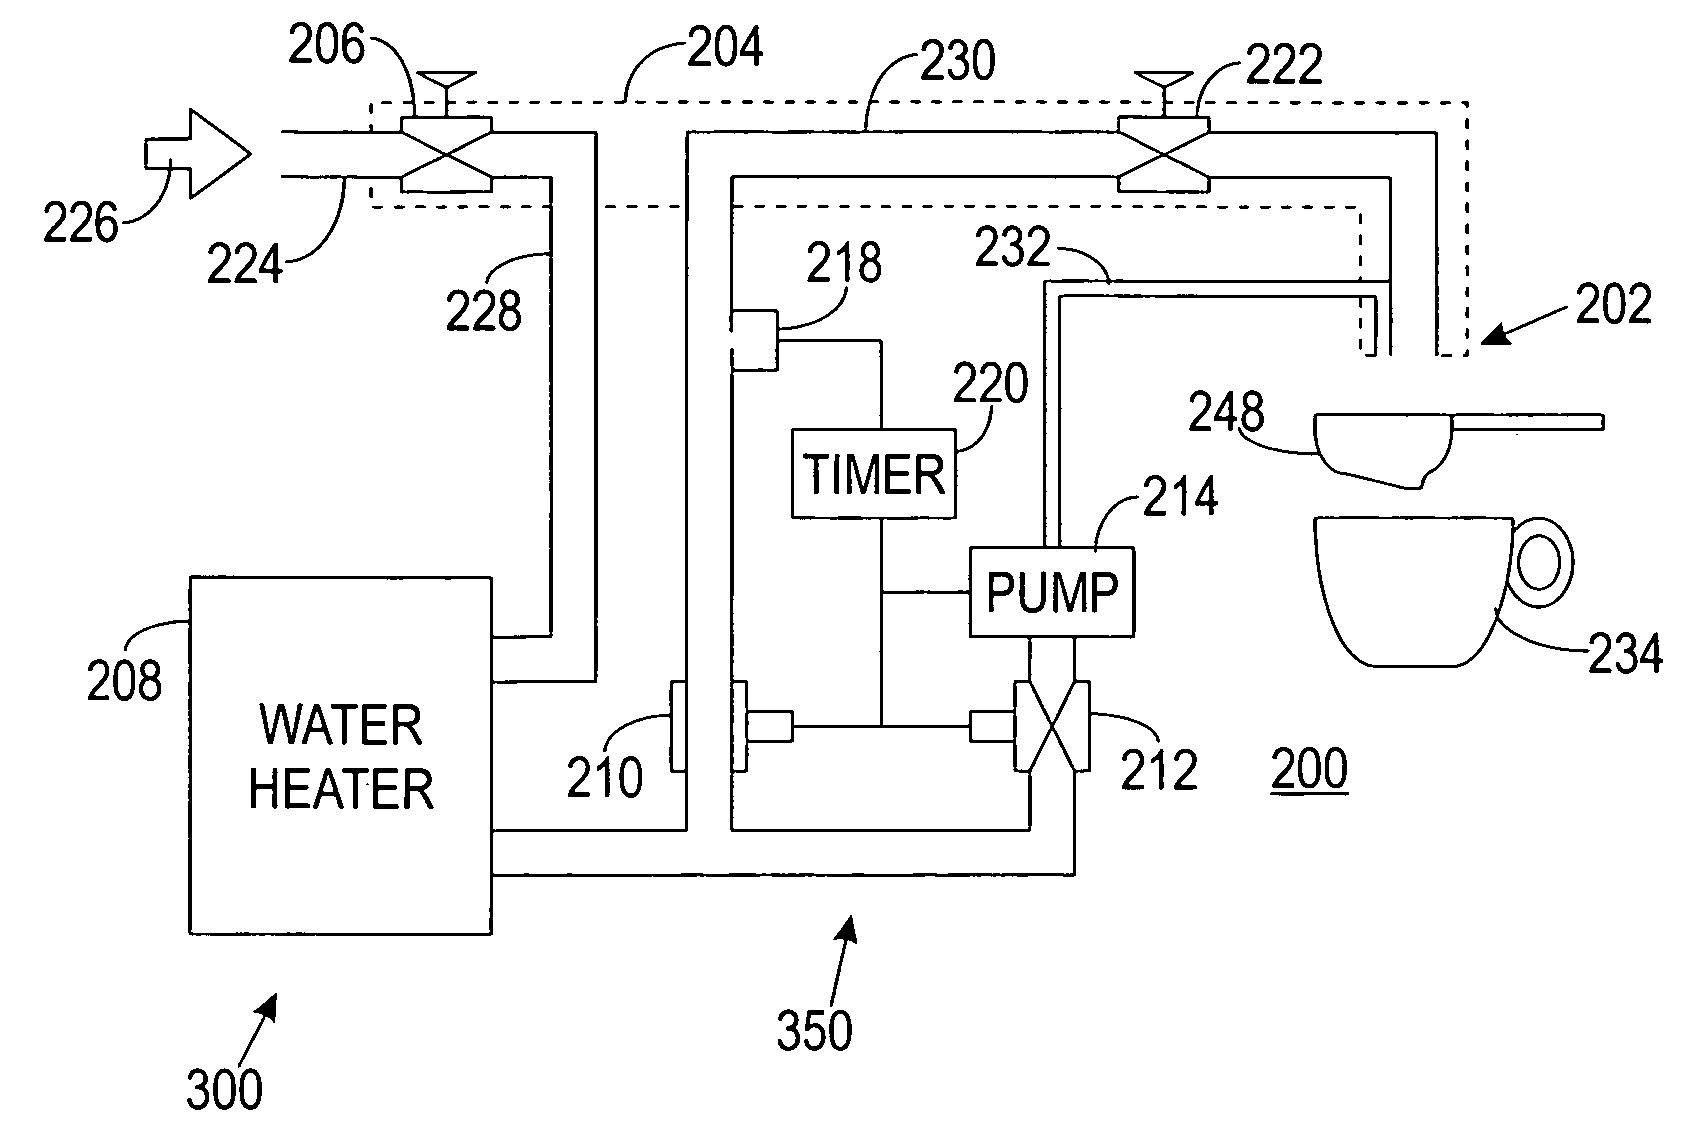 System and method to heat and dispense water